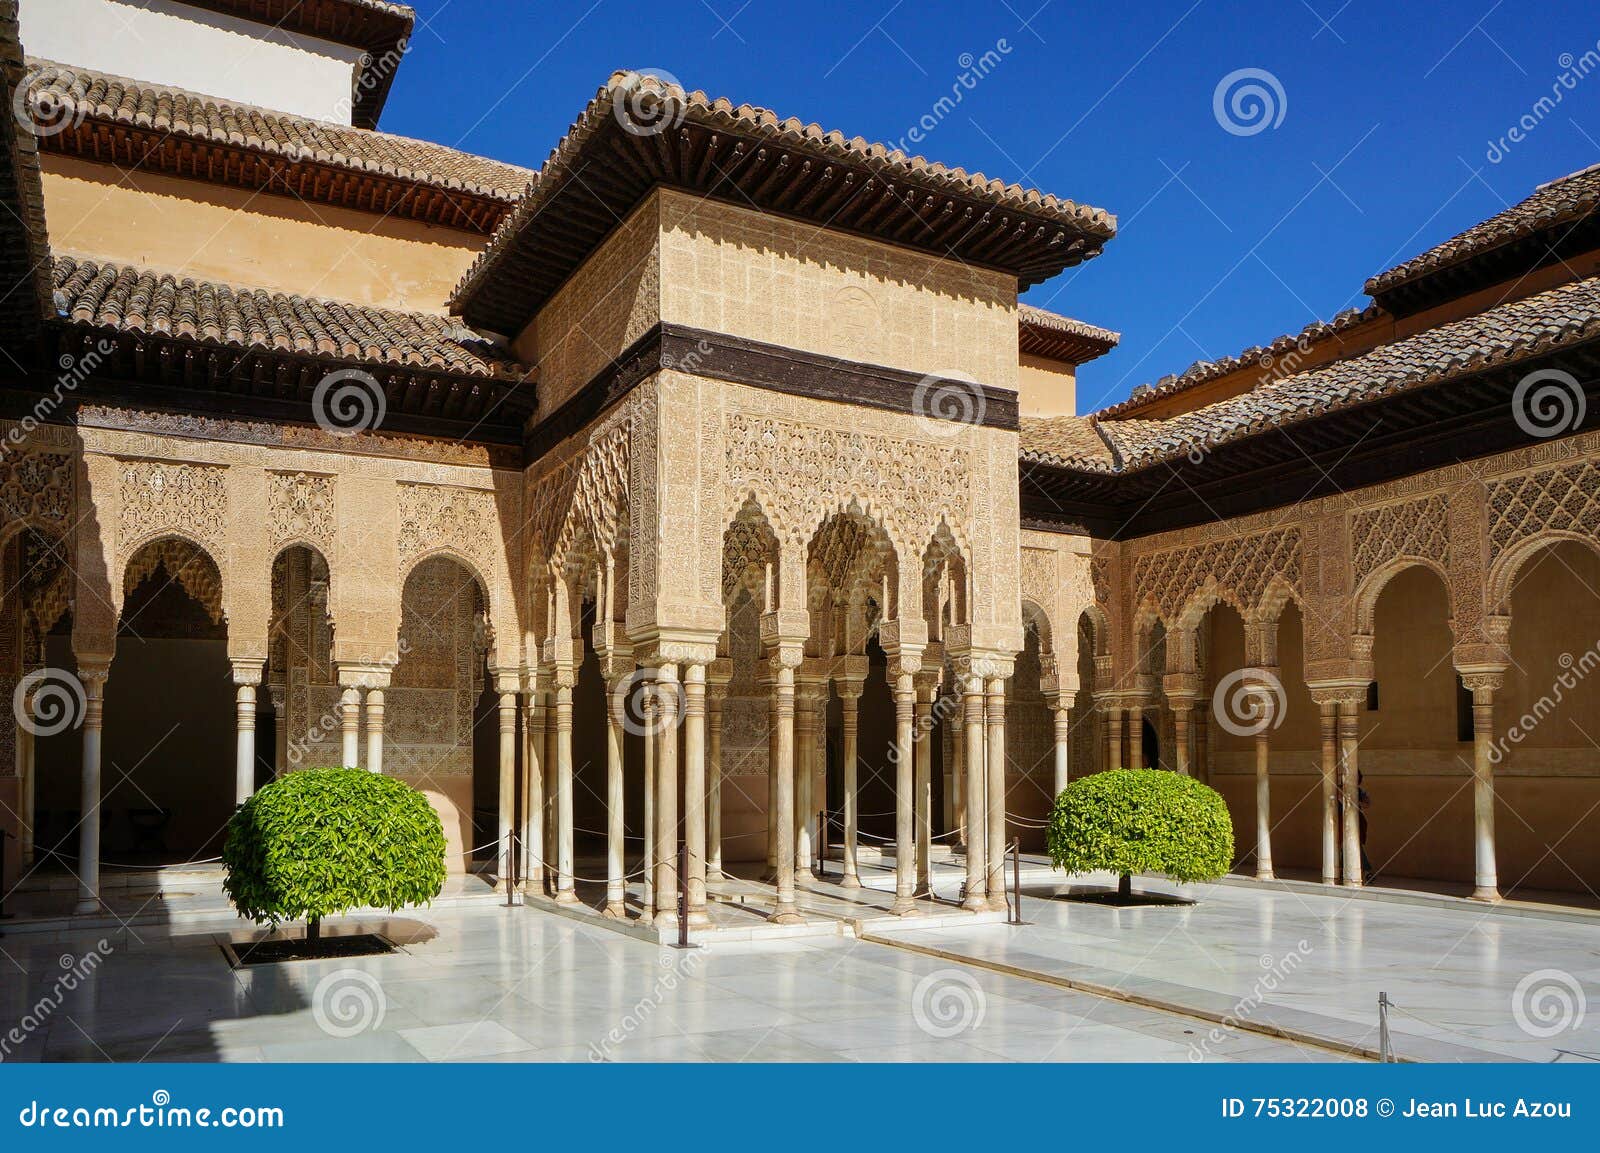 nasrid palace - court of the lions in alhambra in granada, spain